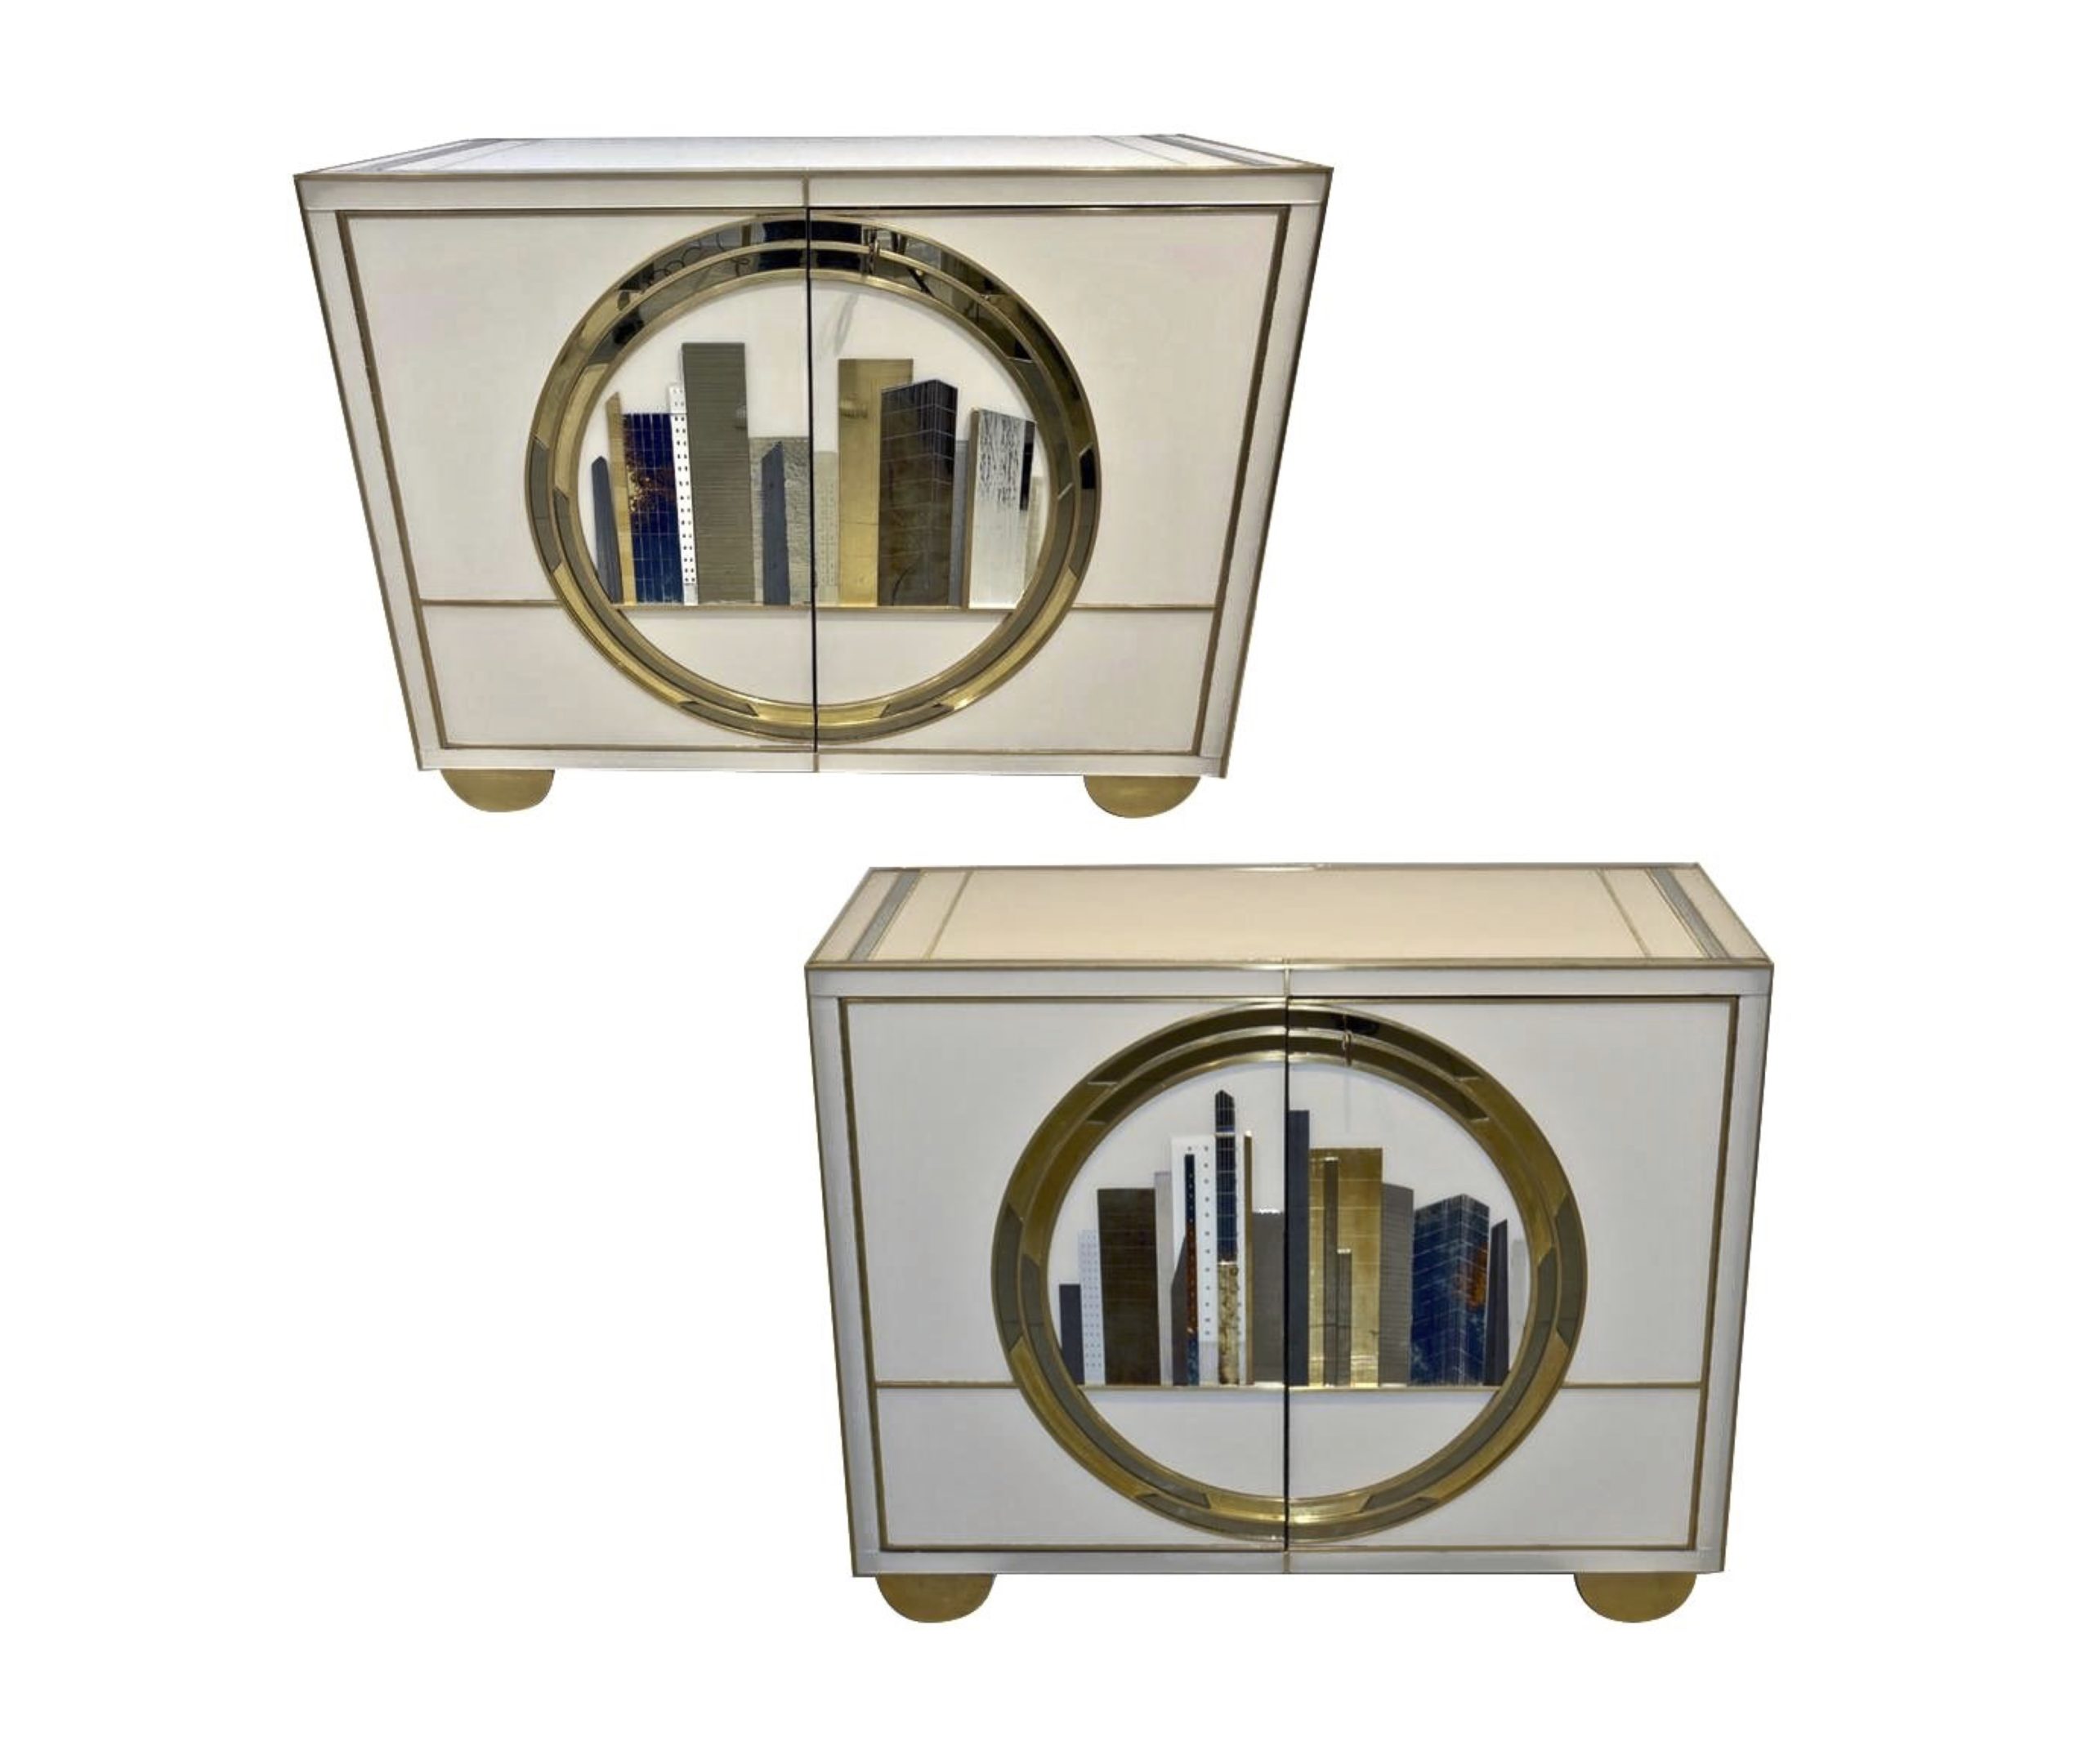 cosulich_interiors_and_antiques_products_new_york_design_italian_contemporary_bespoke_ivory_cabinets_with_new_york_blue_gold_skyline_2-scaled-1